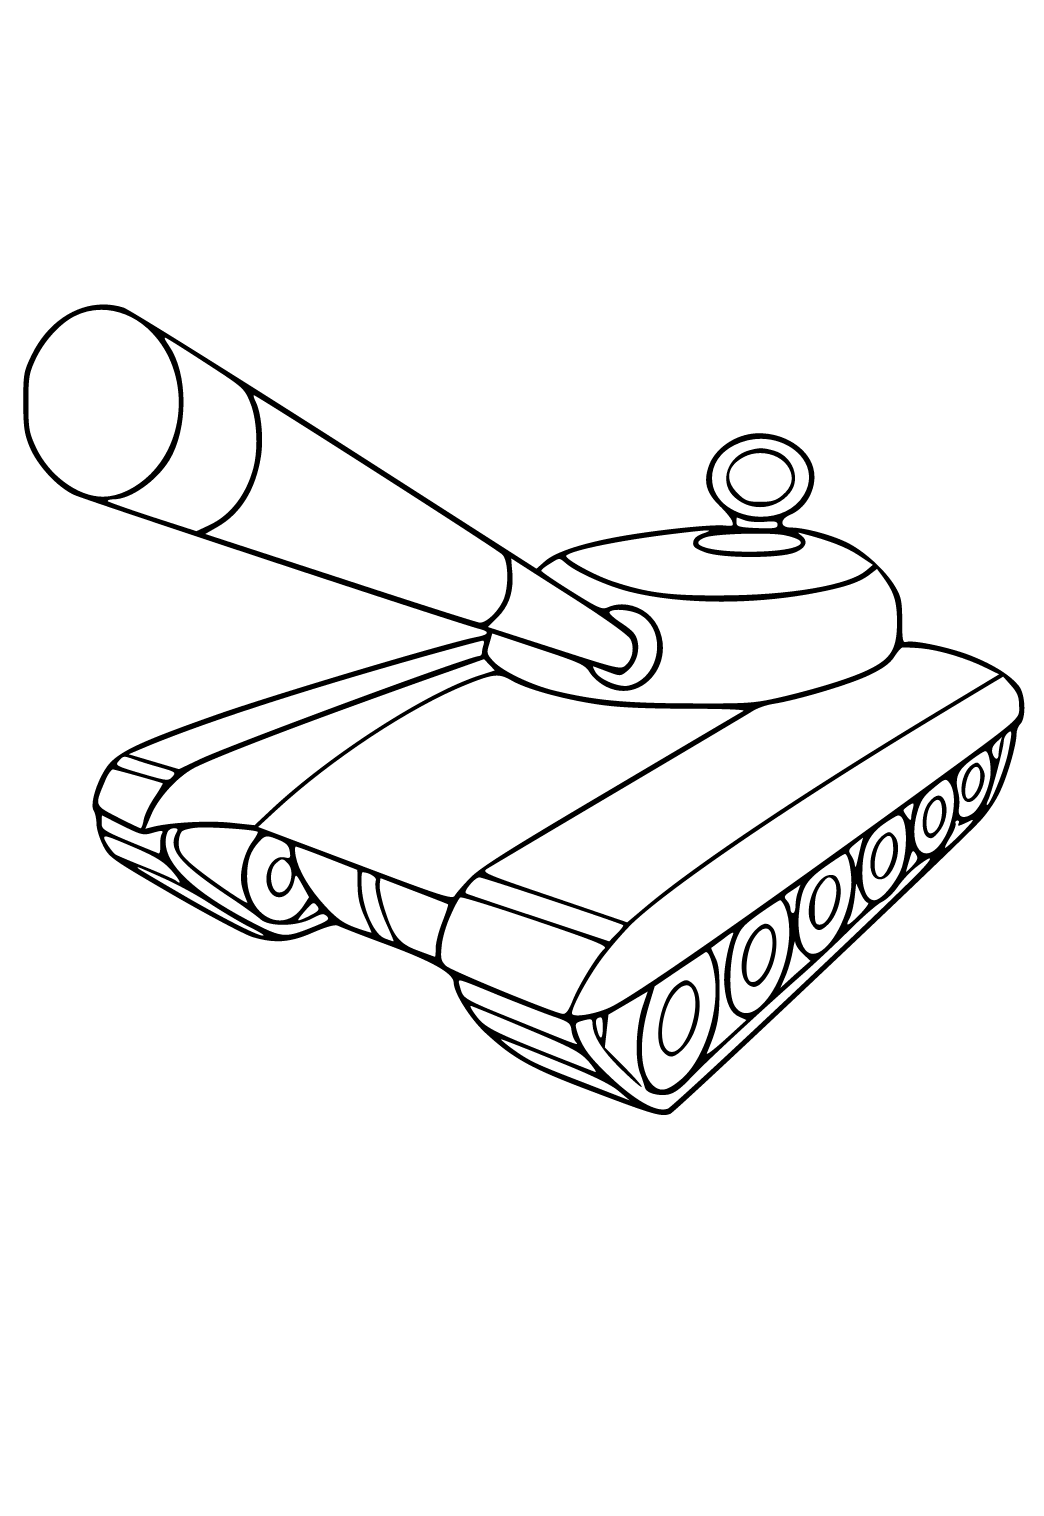 Free printable tank easy coloring page for adults and kids